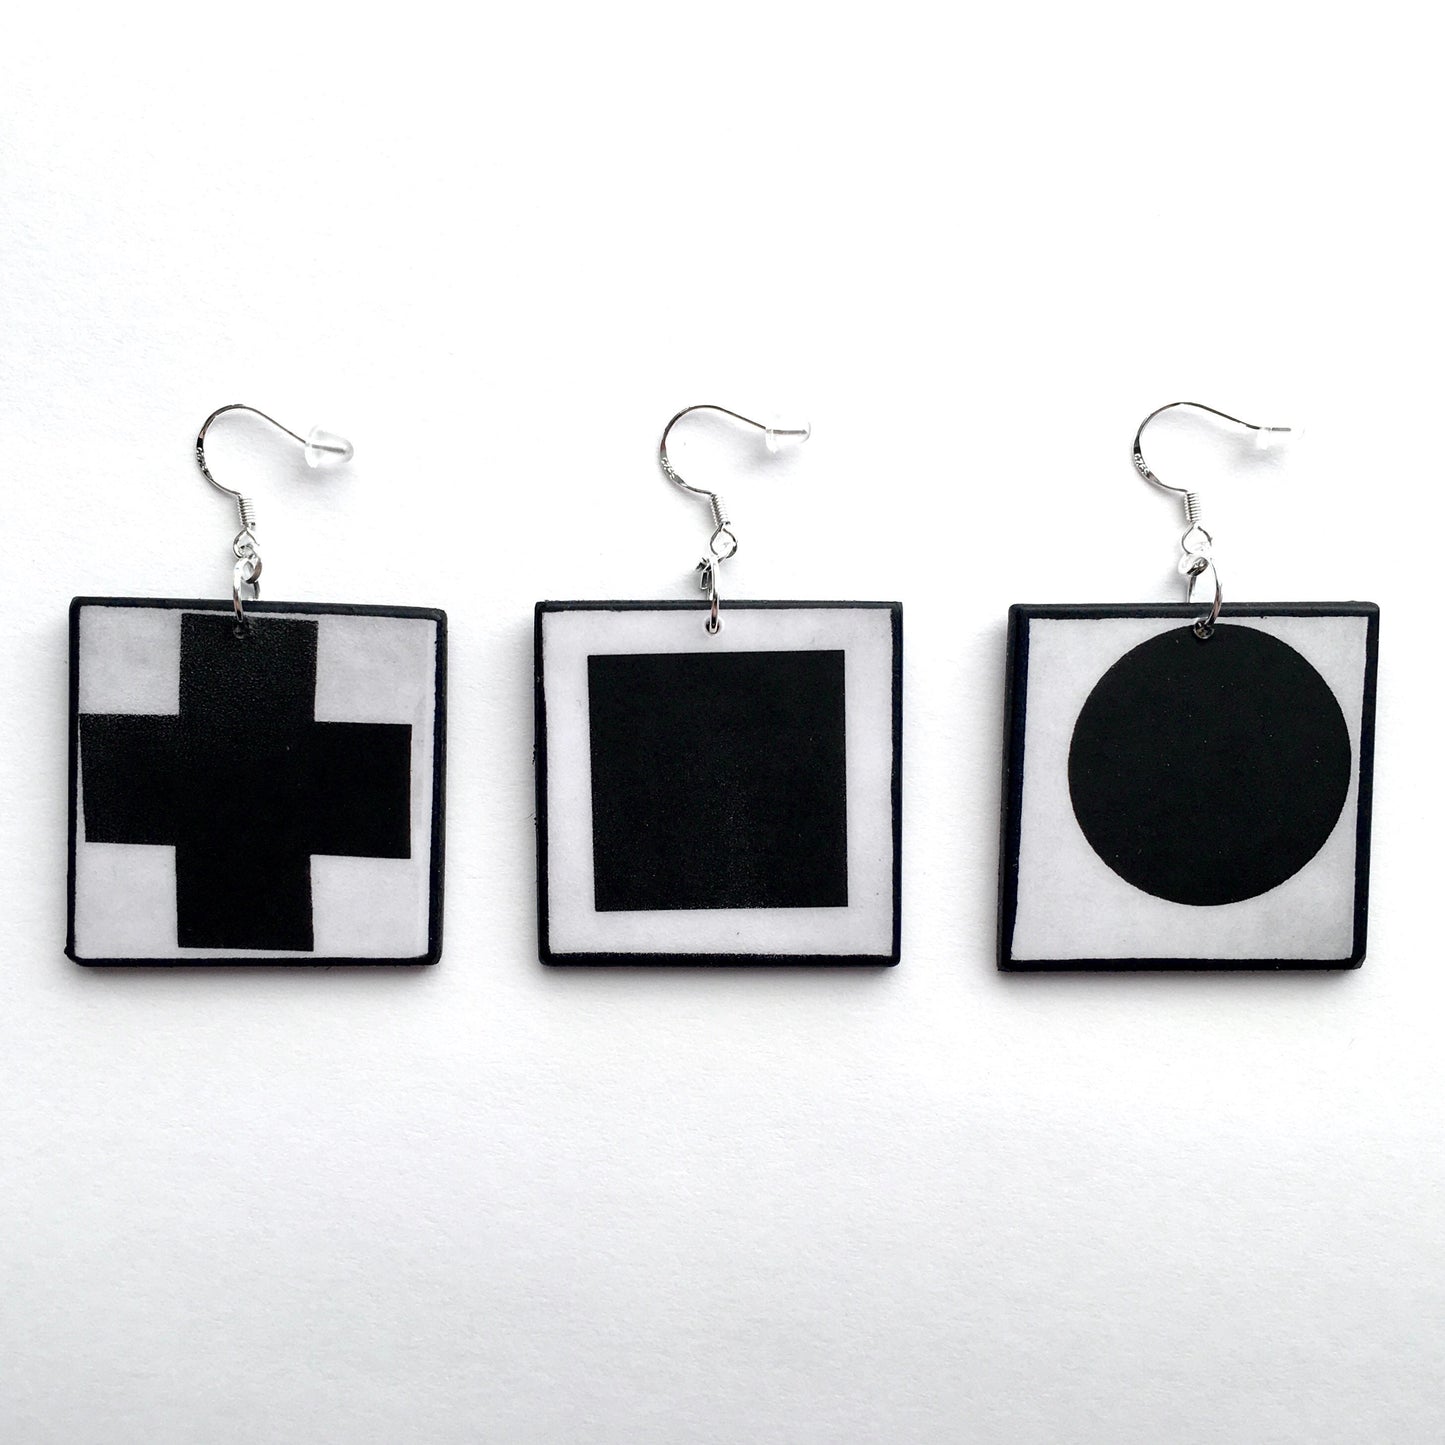 Geometric, abstract, statement art earrings inspired Obljewellery by Kazimir Malevich and his paintings in Suprematism style. Black Cross, Black Circle and Black Square